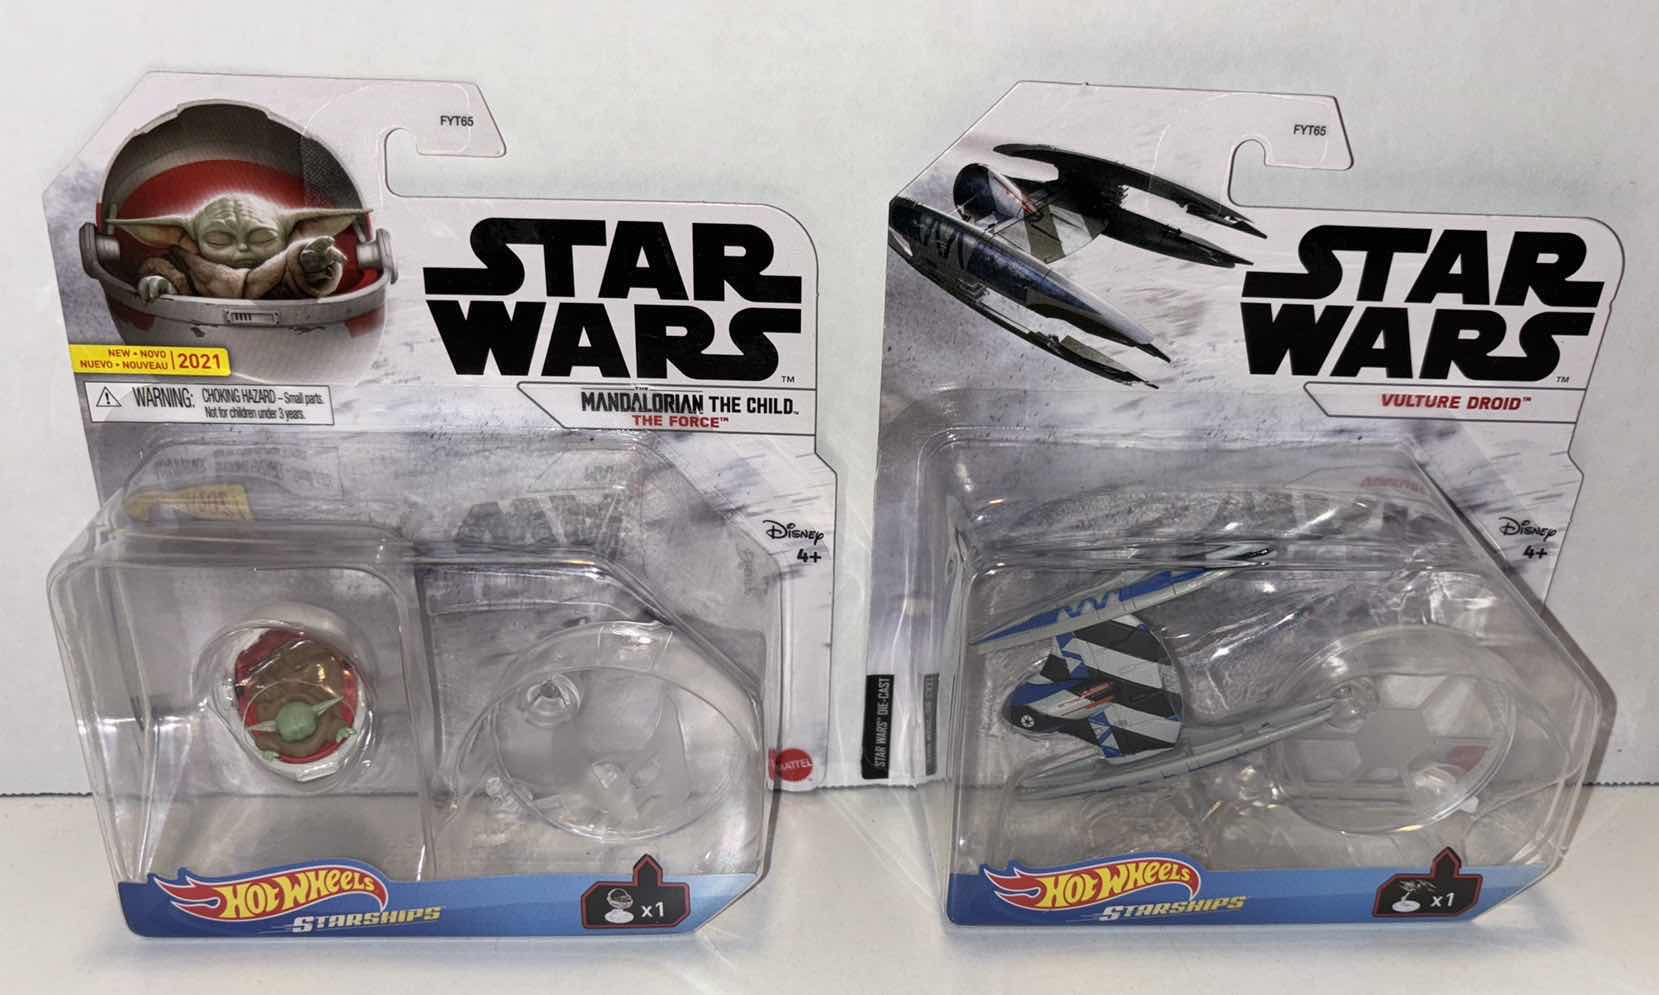 Photo 1 of NEW 2-PACK MATTEL HOT WHEELS STAR WARS STARSHIPS DIE-CAST VEHICLE, THE MANDALORIAN “THE CHILD HOVER PRAM” & “VULTURE DROID”